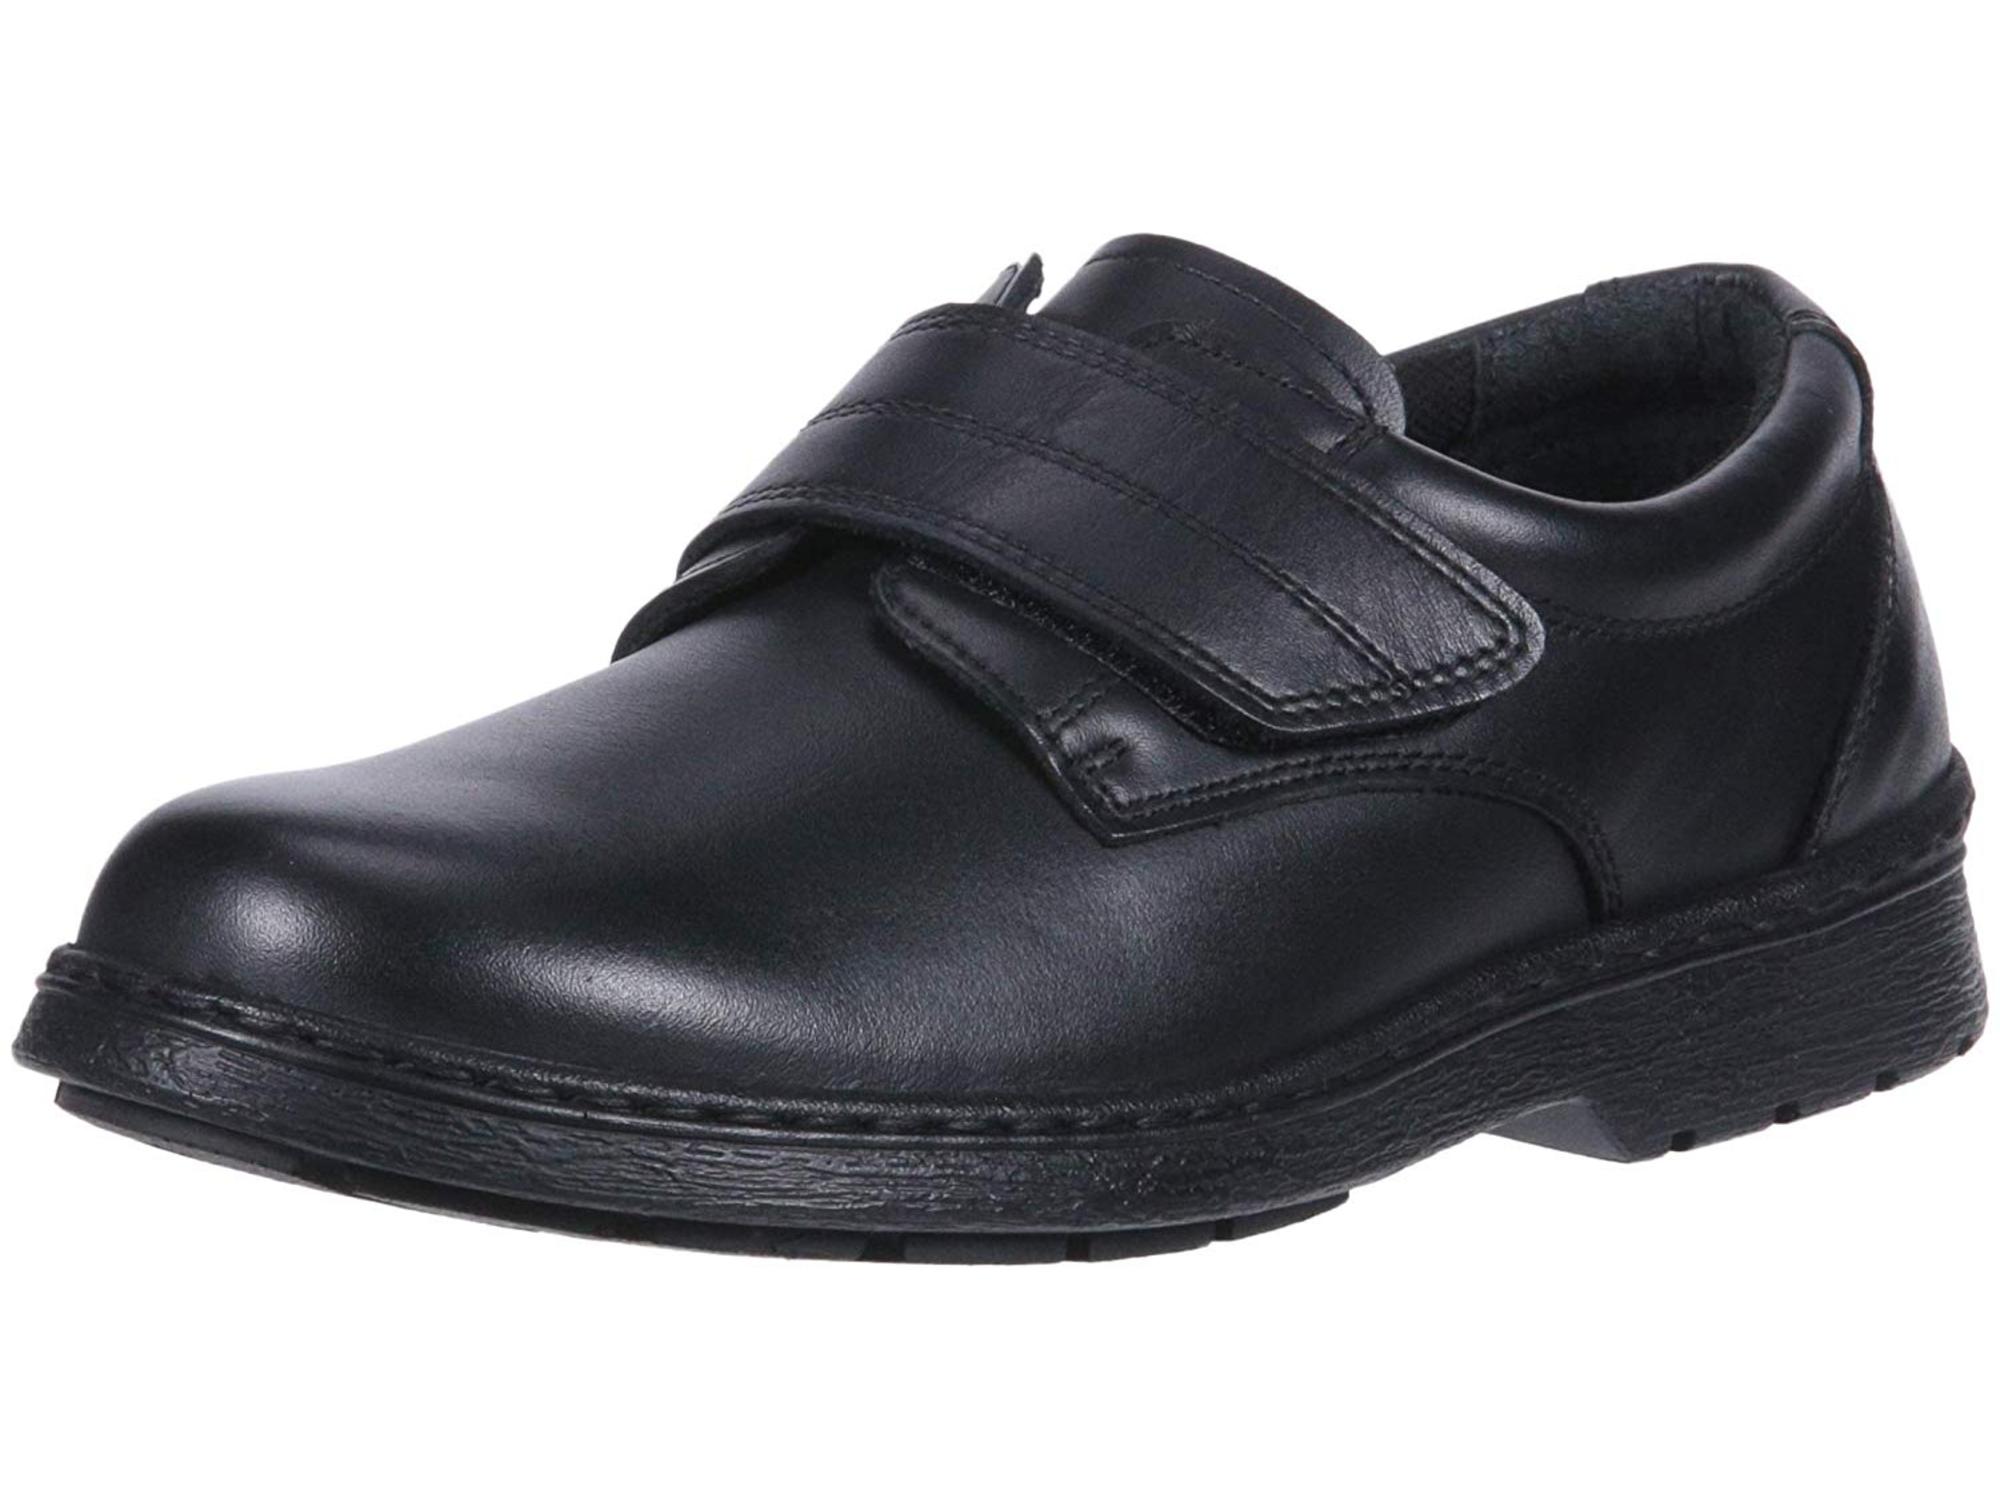 Kids School Issue Boys Eddie H&L Leather  Oxfords, Black Leather, Size 0.0 - image 1 of 6